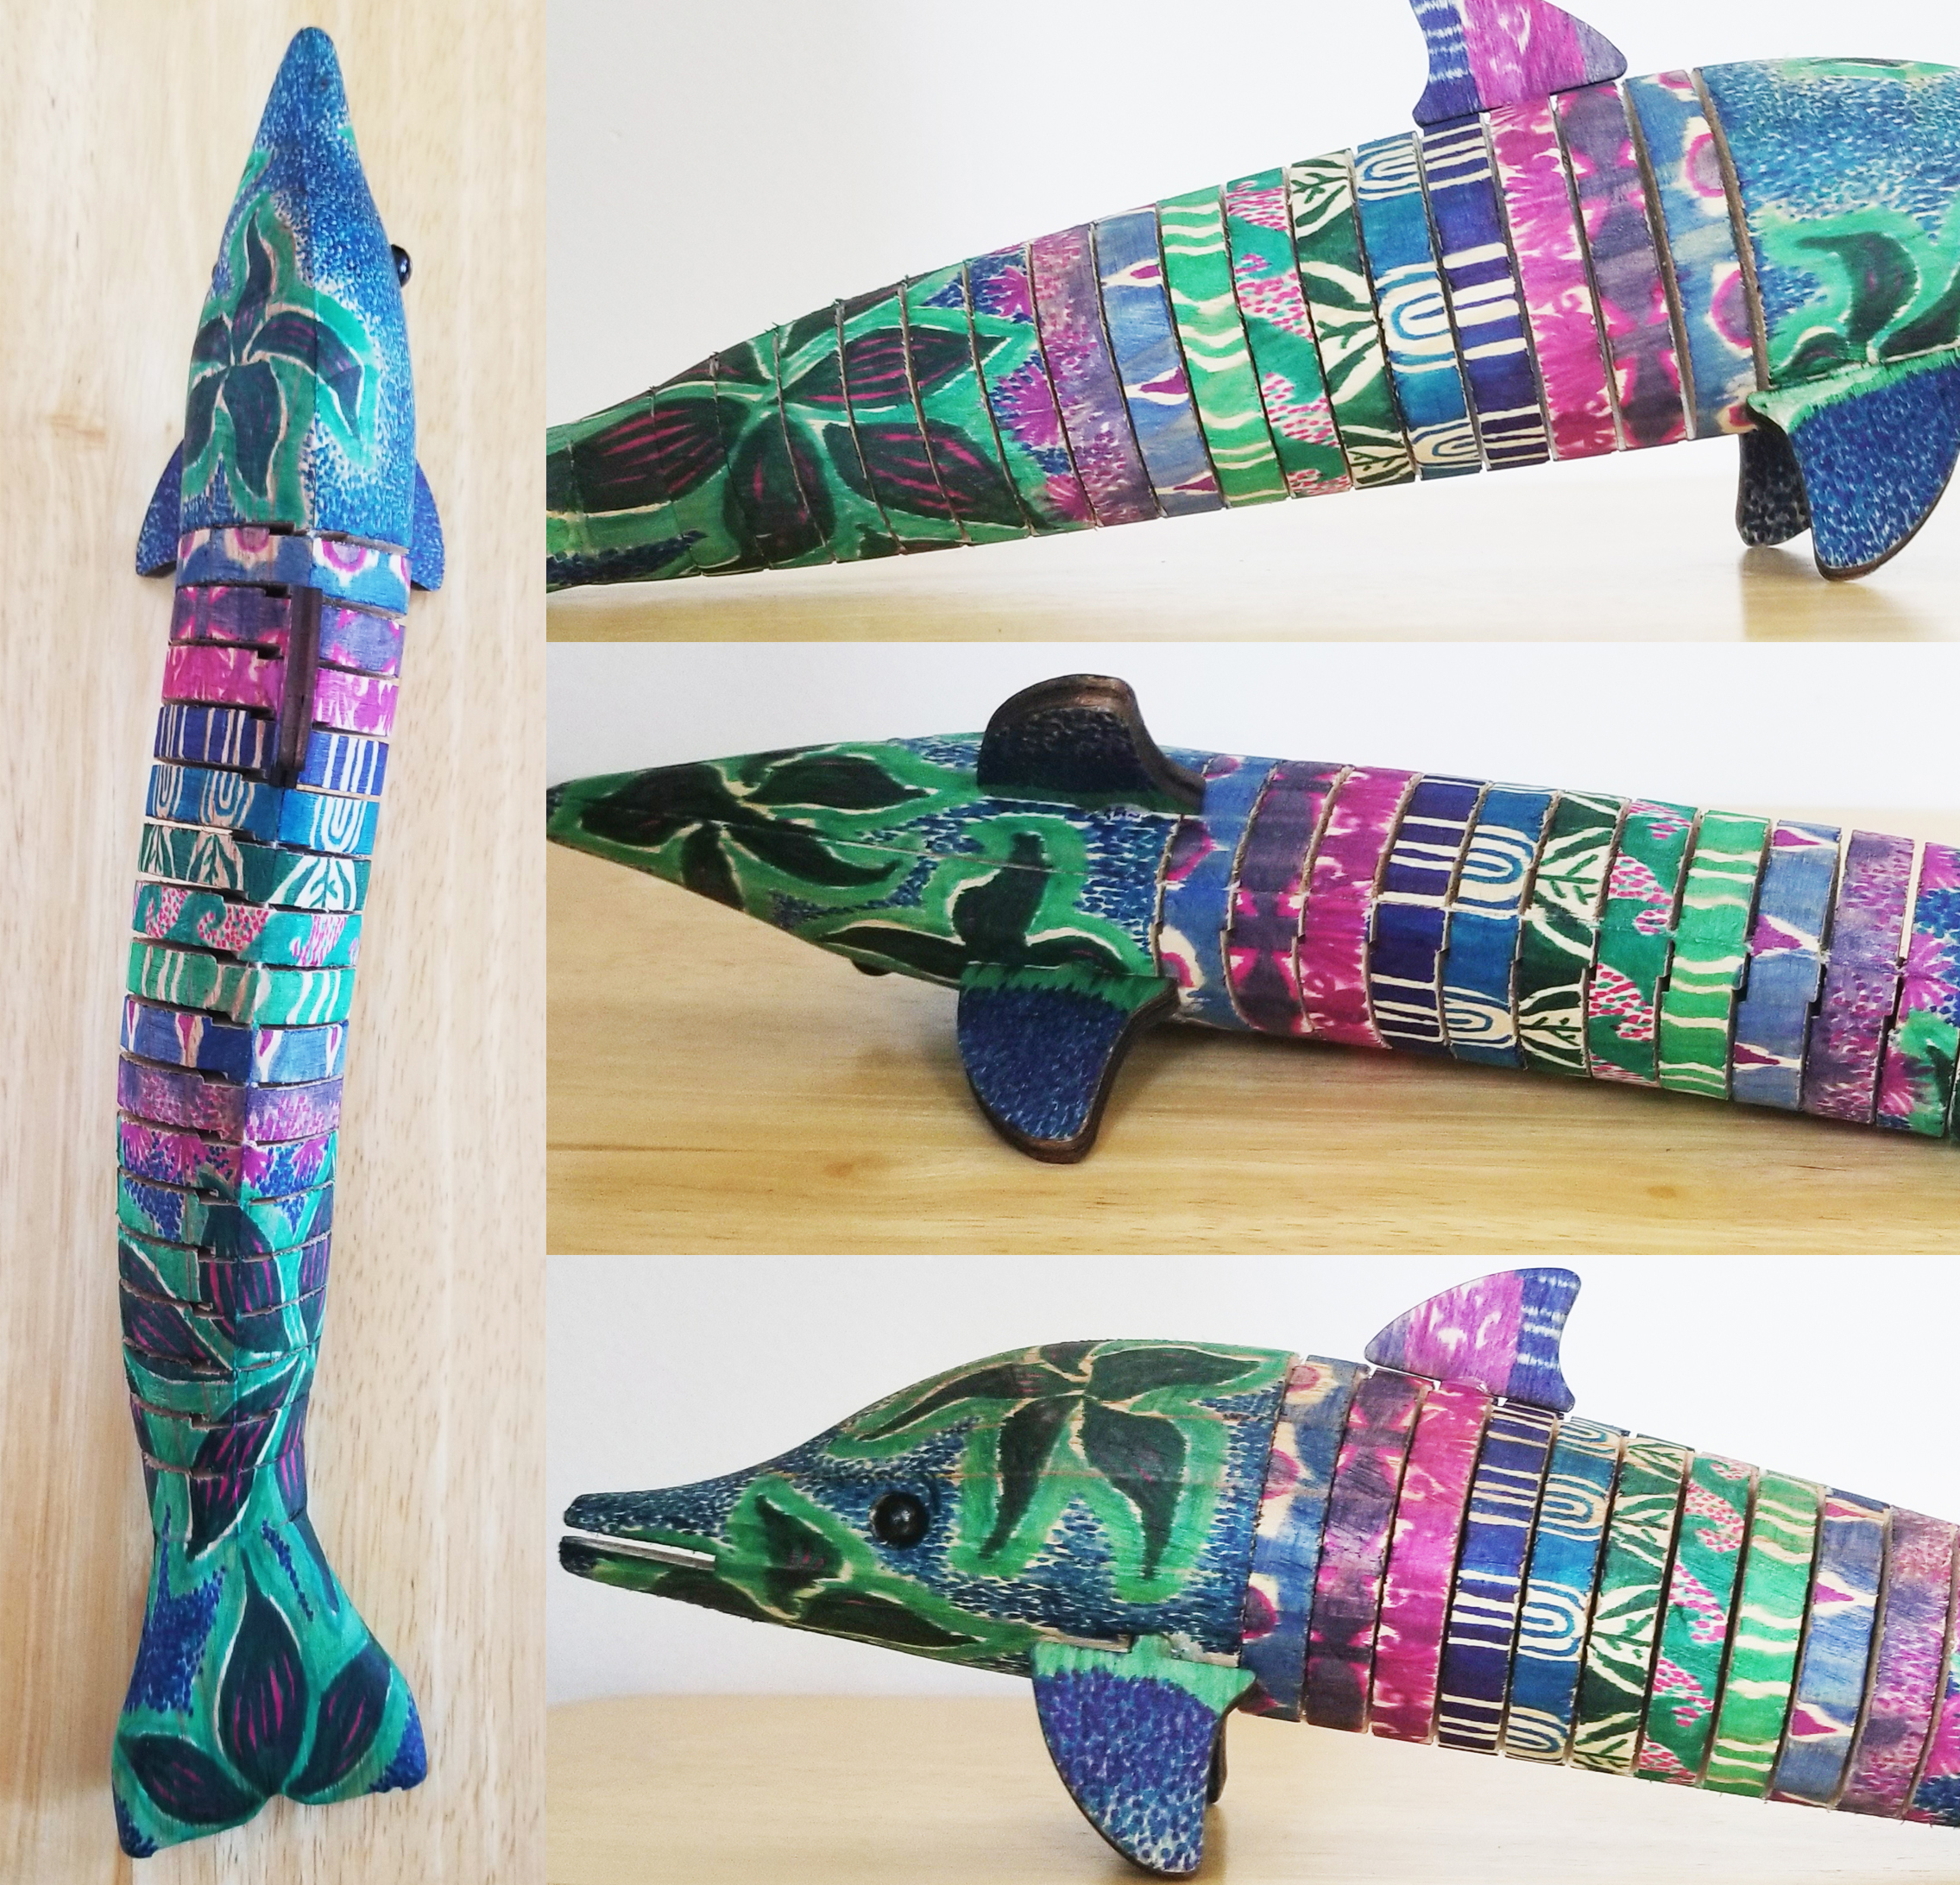 This Colorful Hand Painted Wooden Dolphin - One of a kind - Reticulated is made with love by The Creative Soul Sisters! Shop more unique gift ideas today with Spots Initiatives, the best way to support creators.